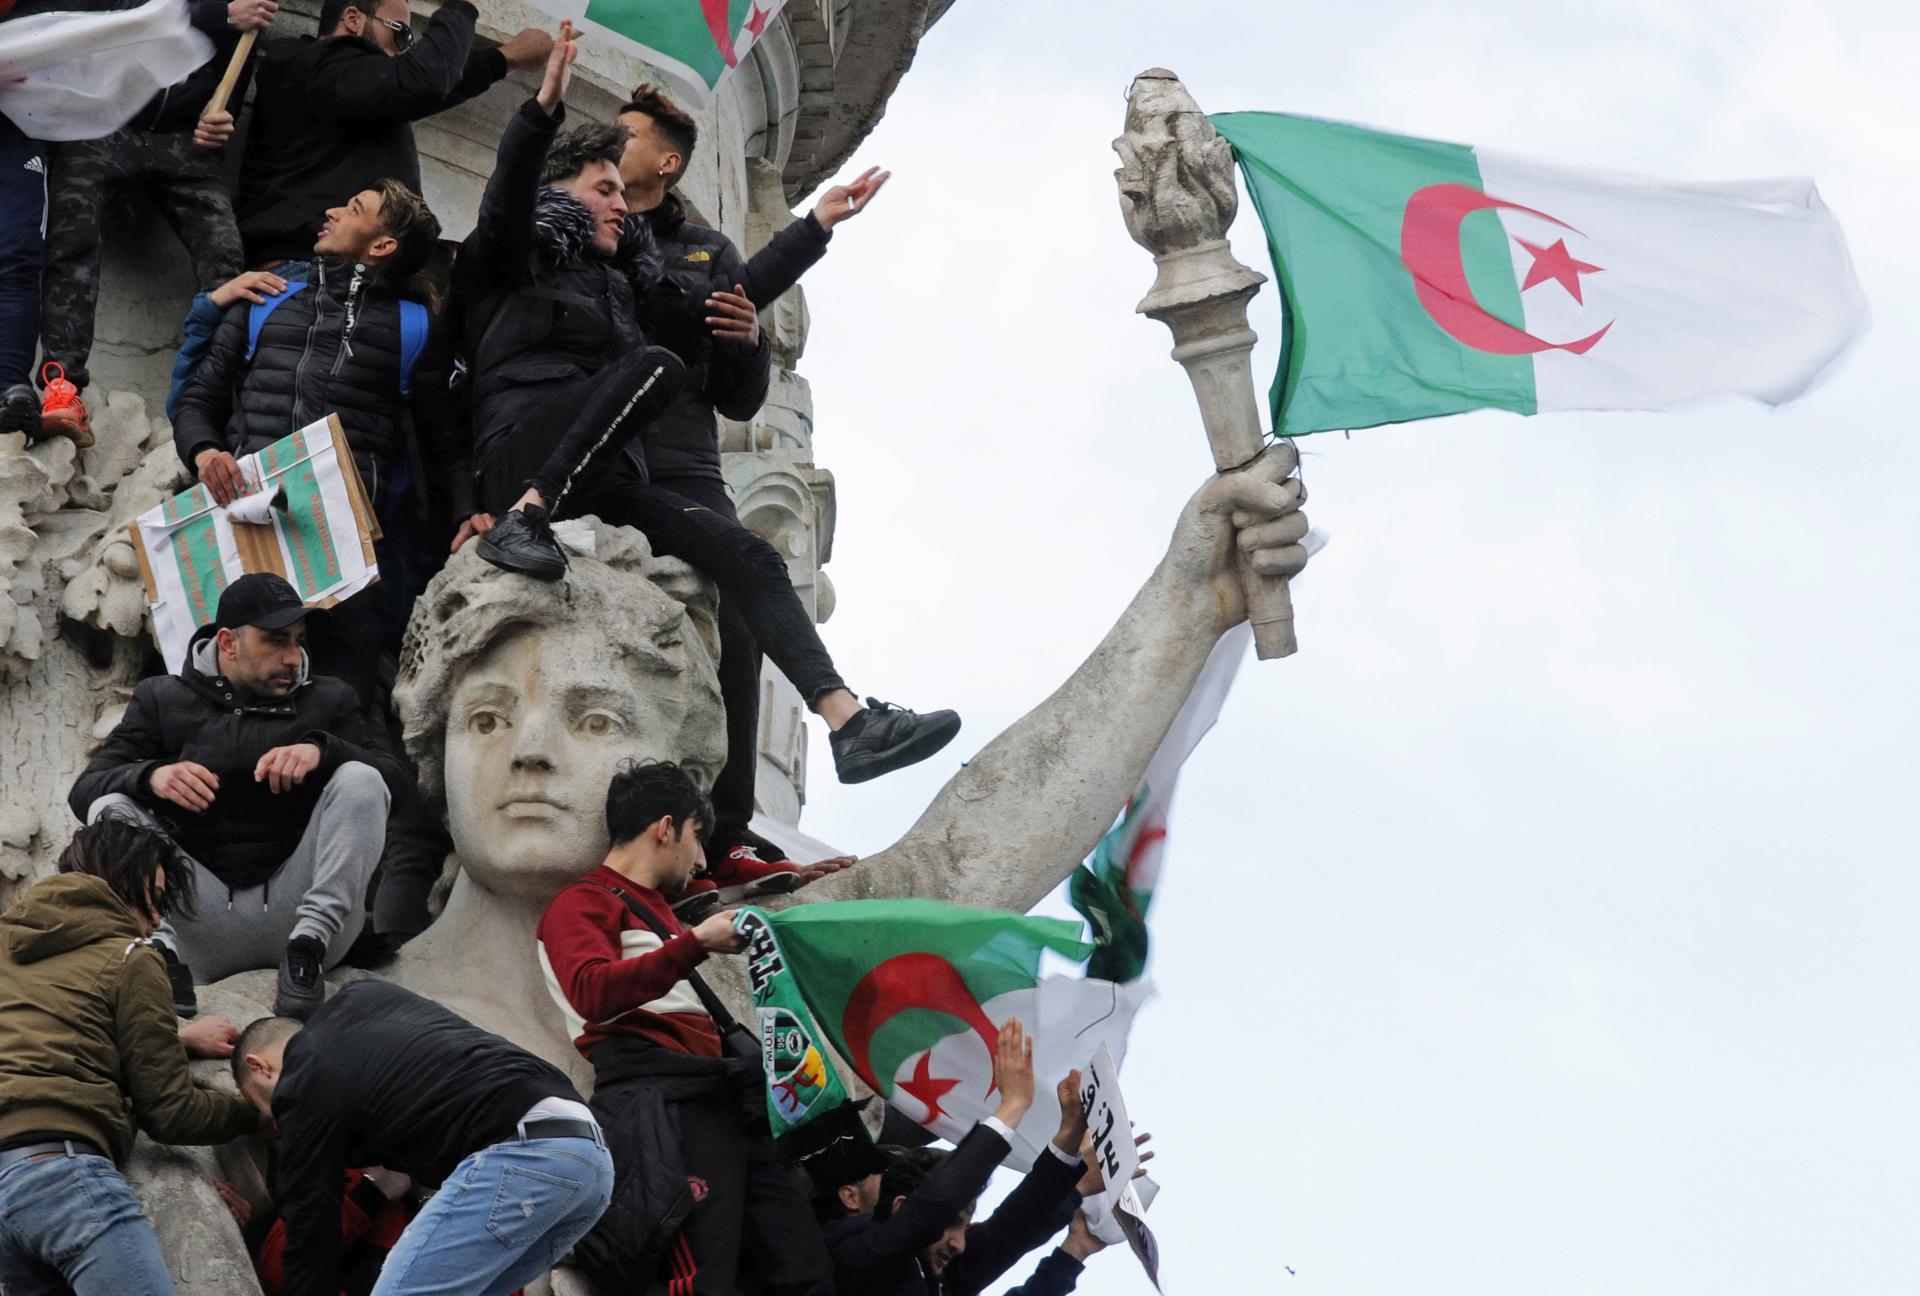 Many young men holding Algerian flags scale a monument of a woman holding a torch, attached to which is a flag